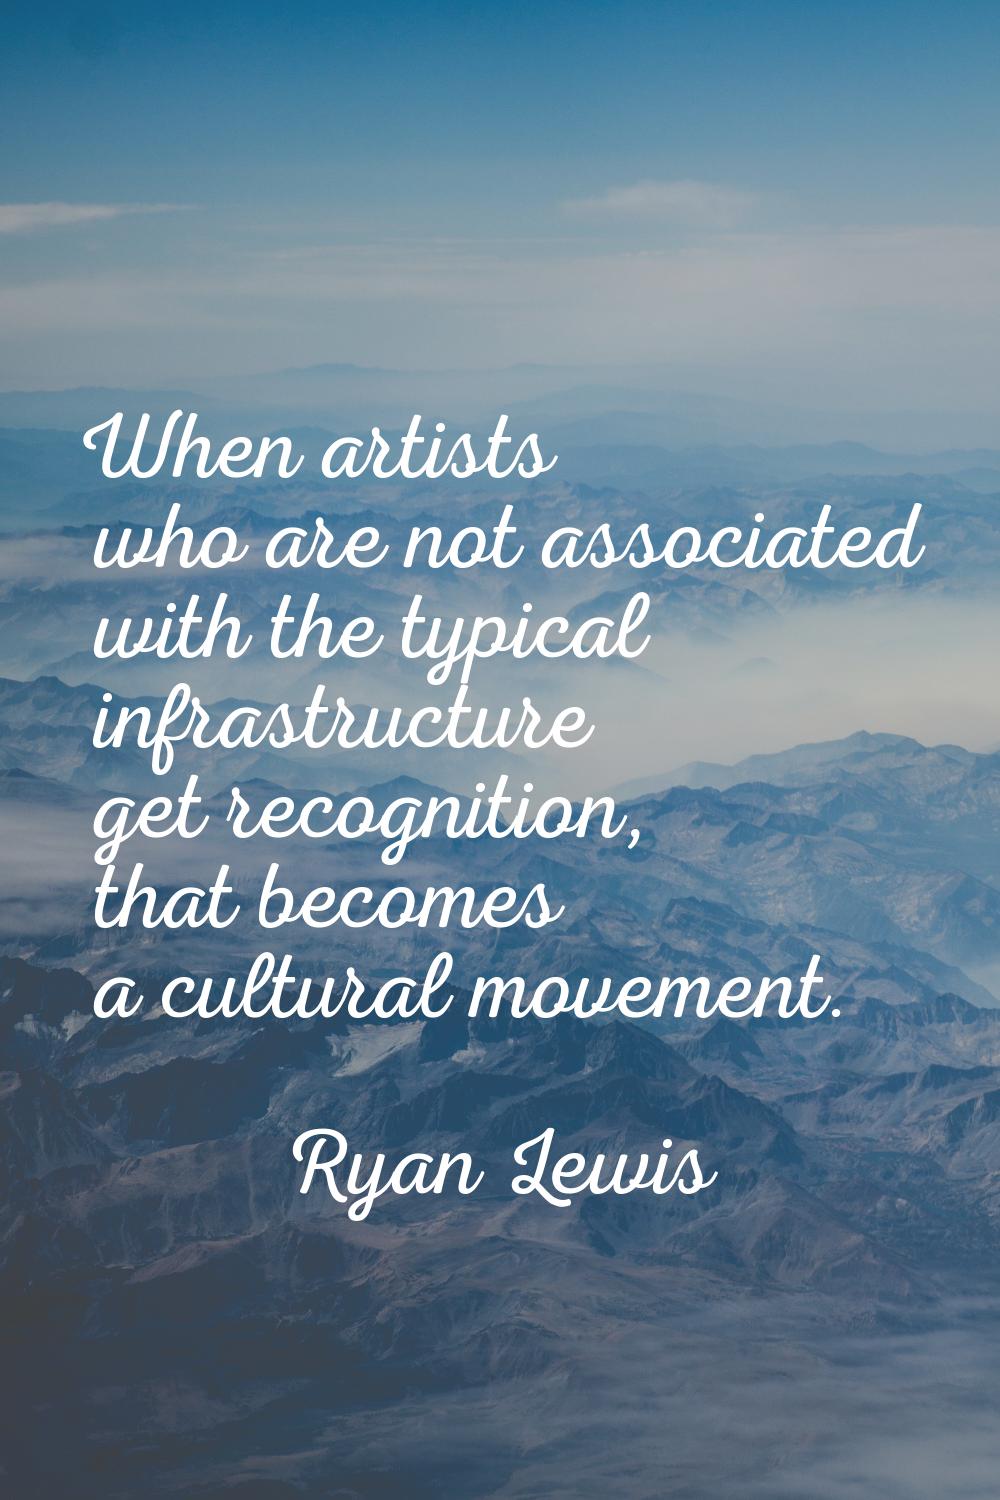 When artists who are not associated with the typical infrastructure get recognition, that becomes a